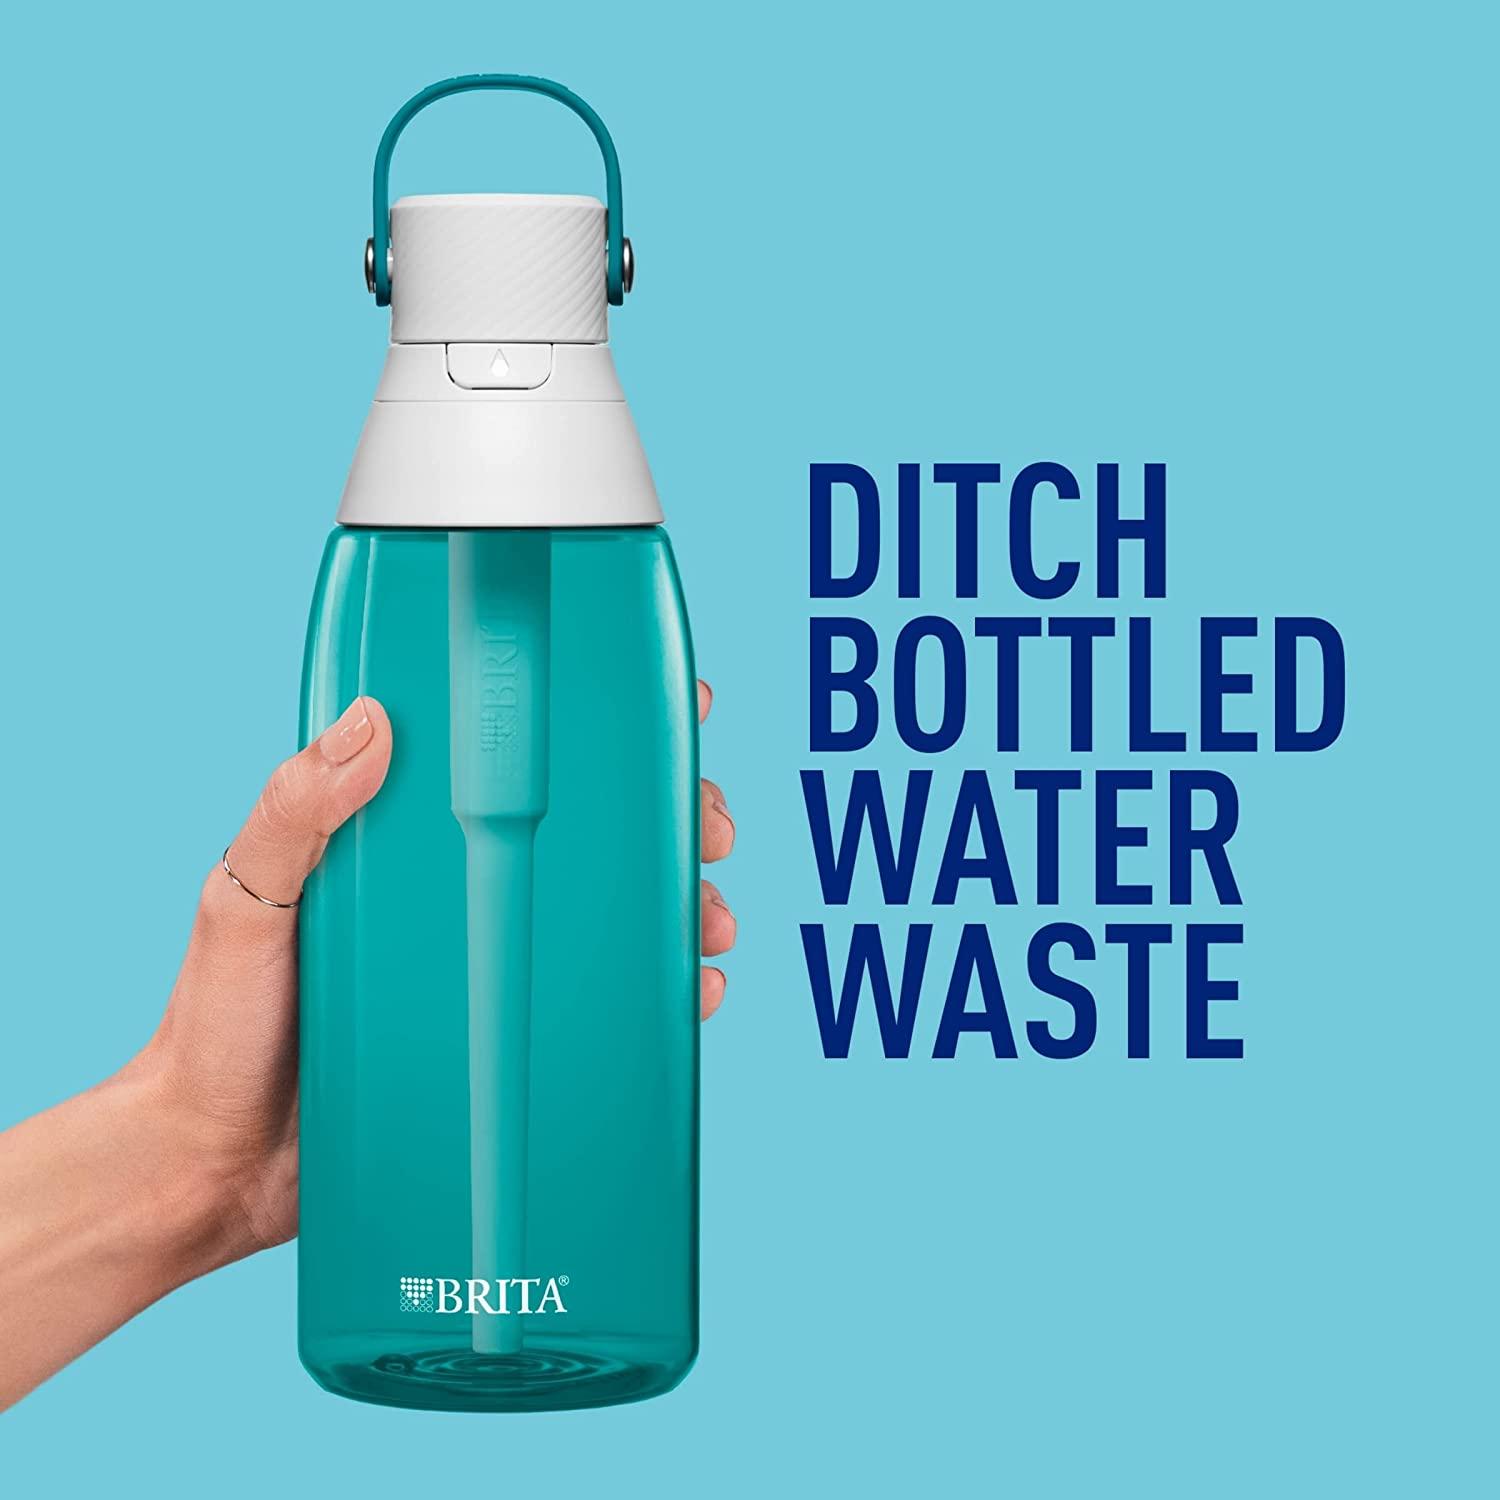 Save on Brita Filters, Water Bottles, and More